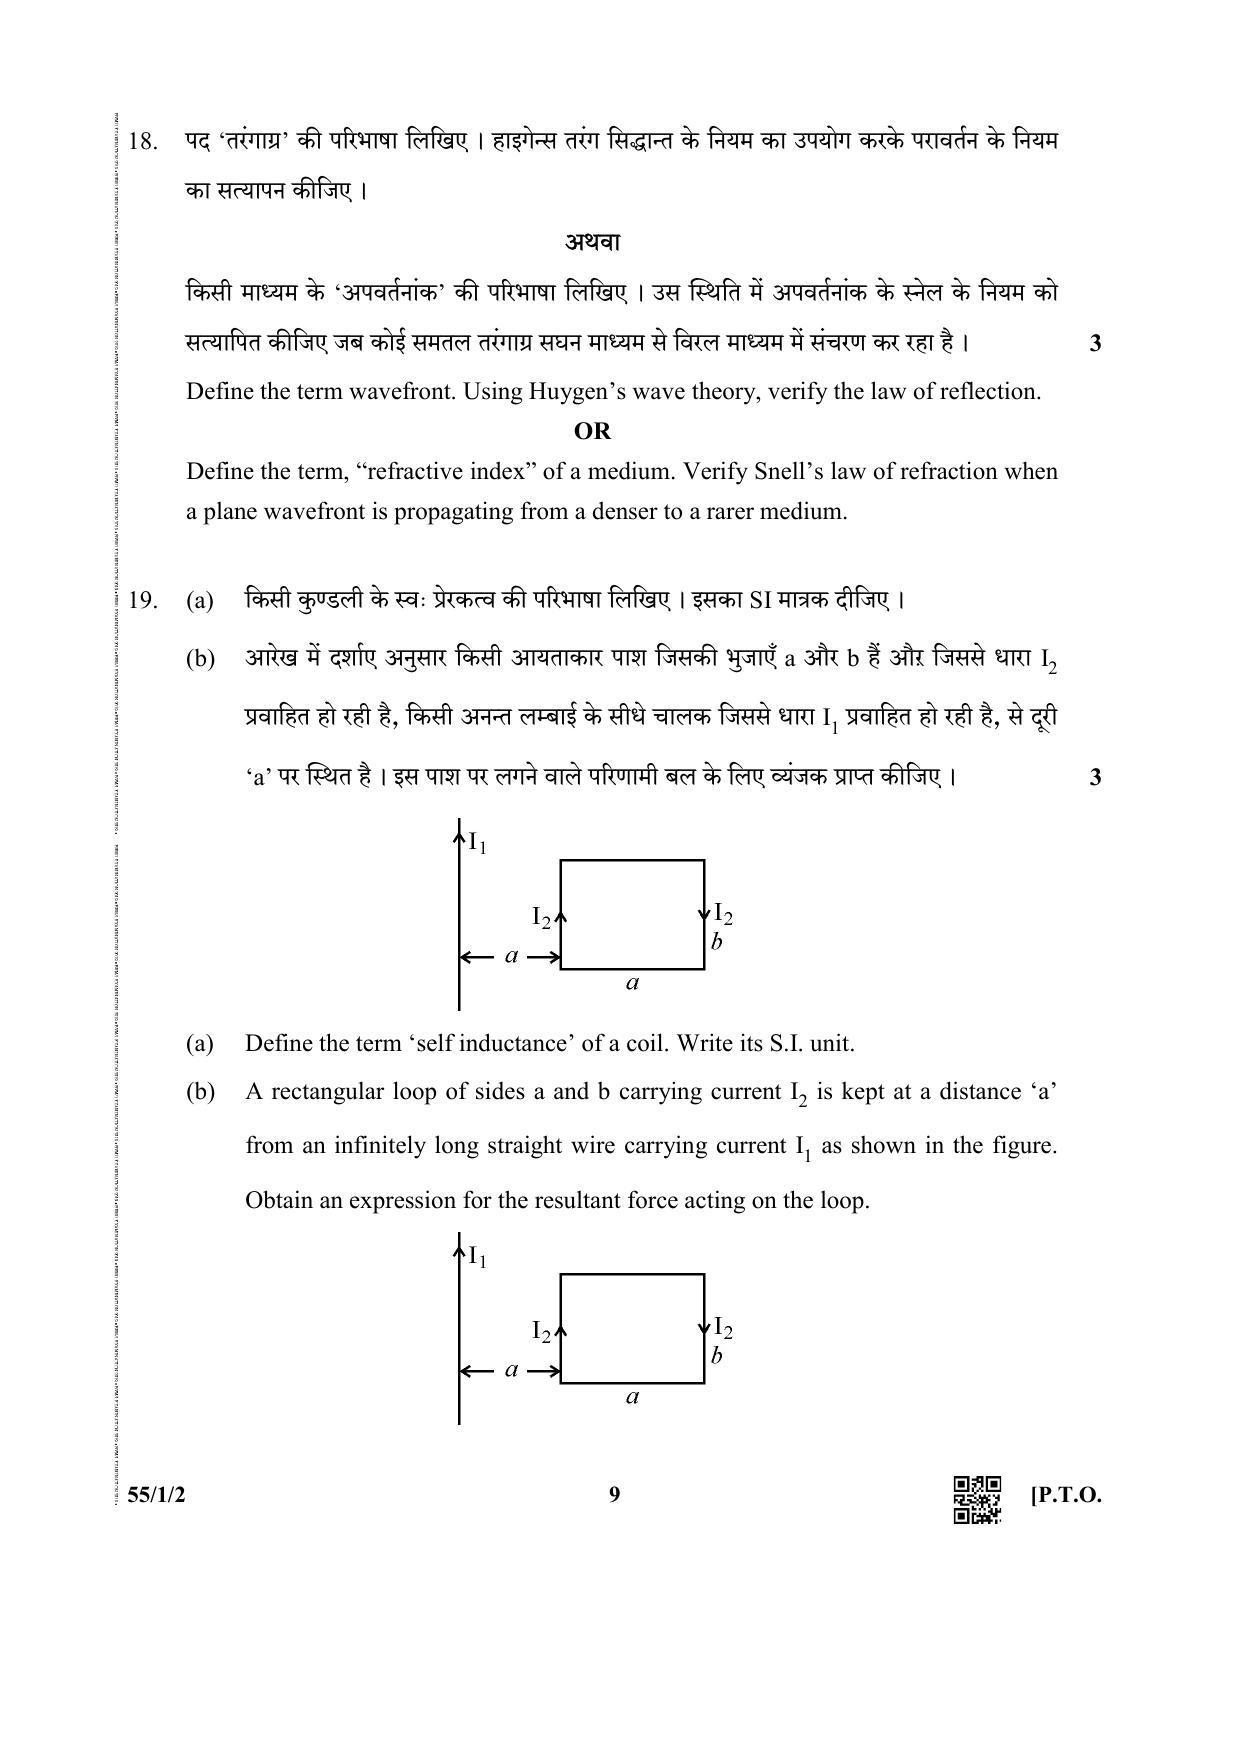 CBSE Class 12 55-1-2 (Physics) 2019 Question Paper - Page 9